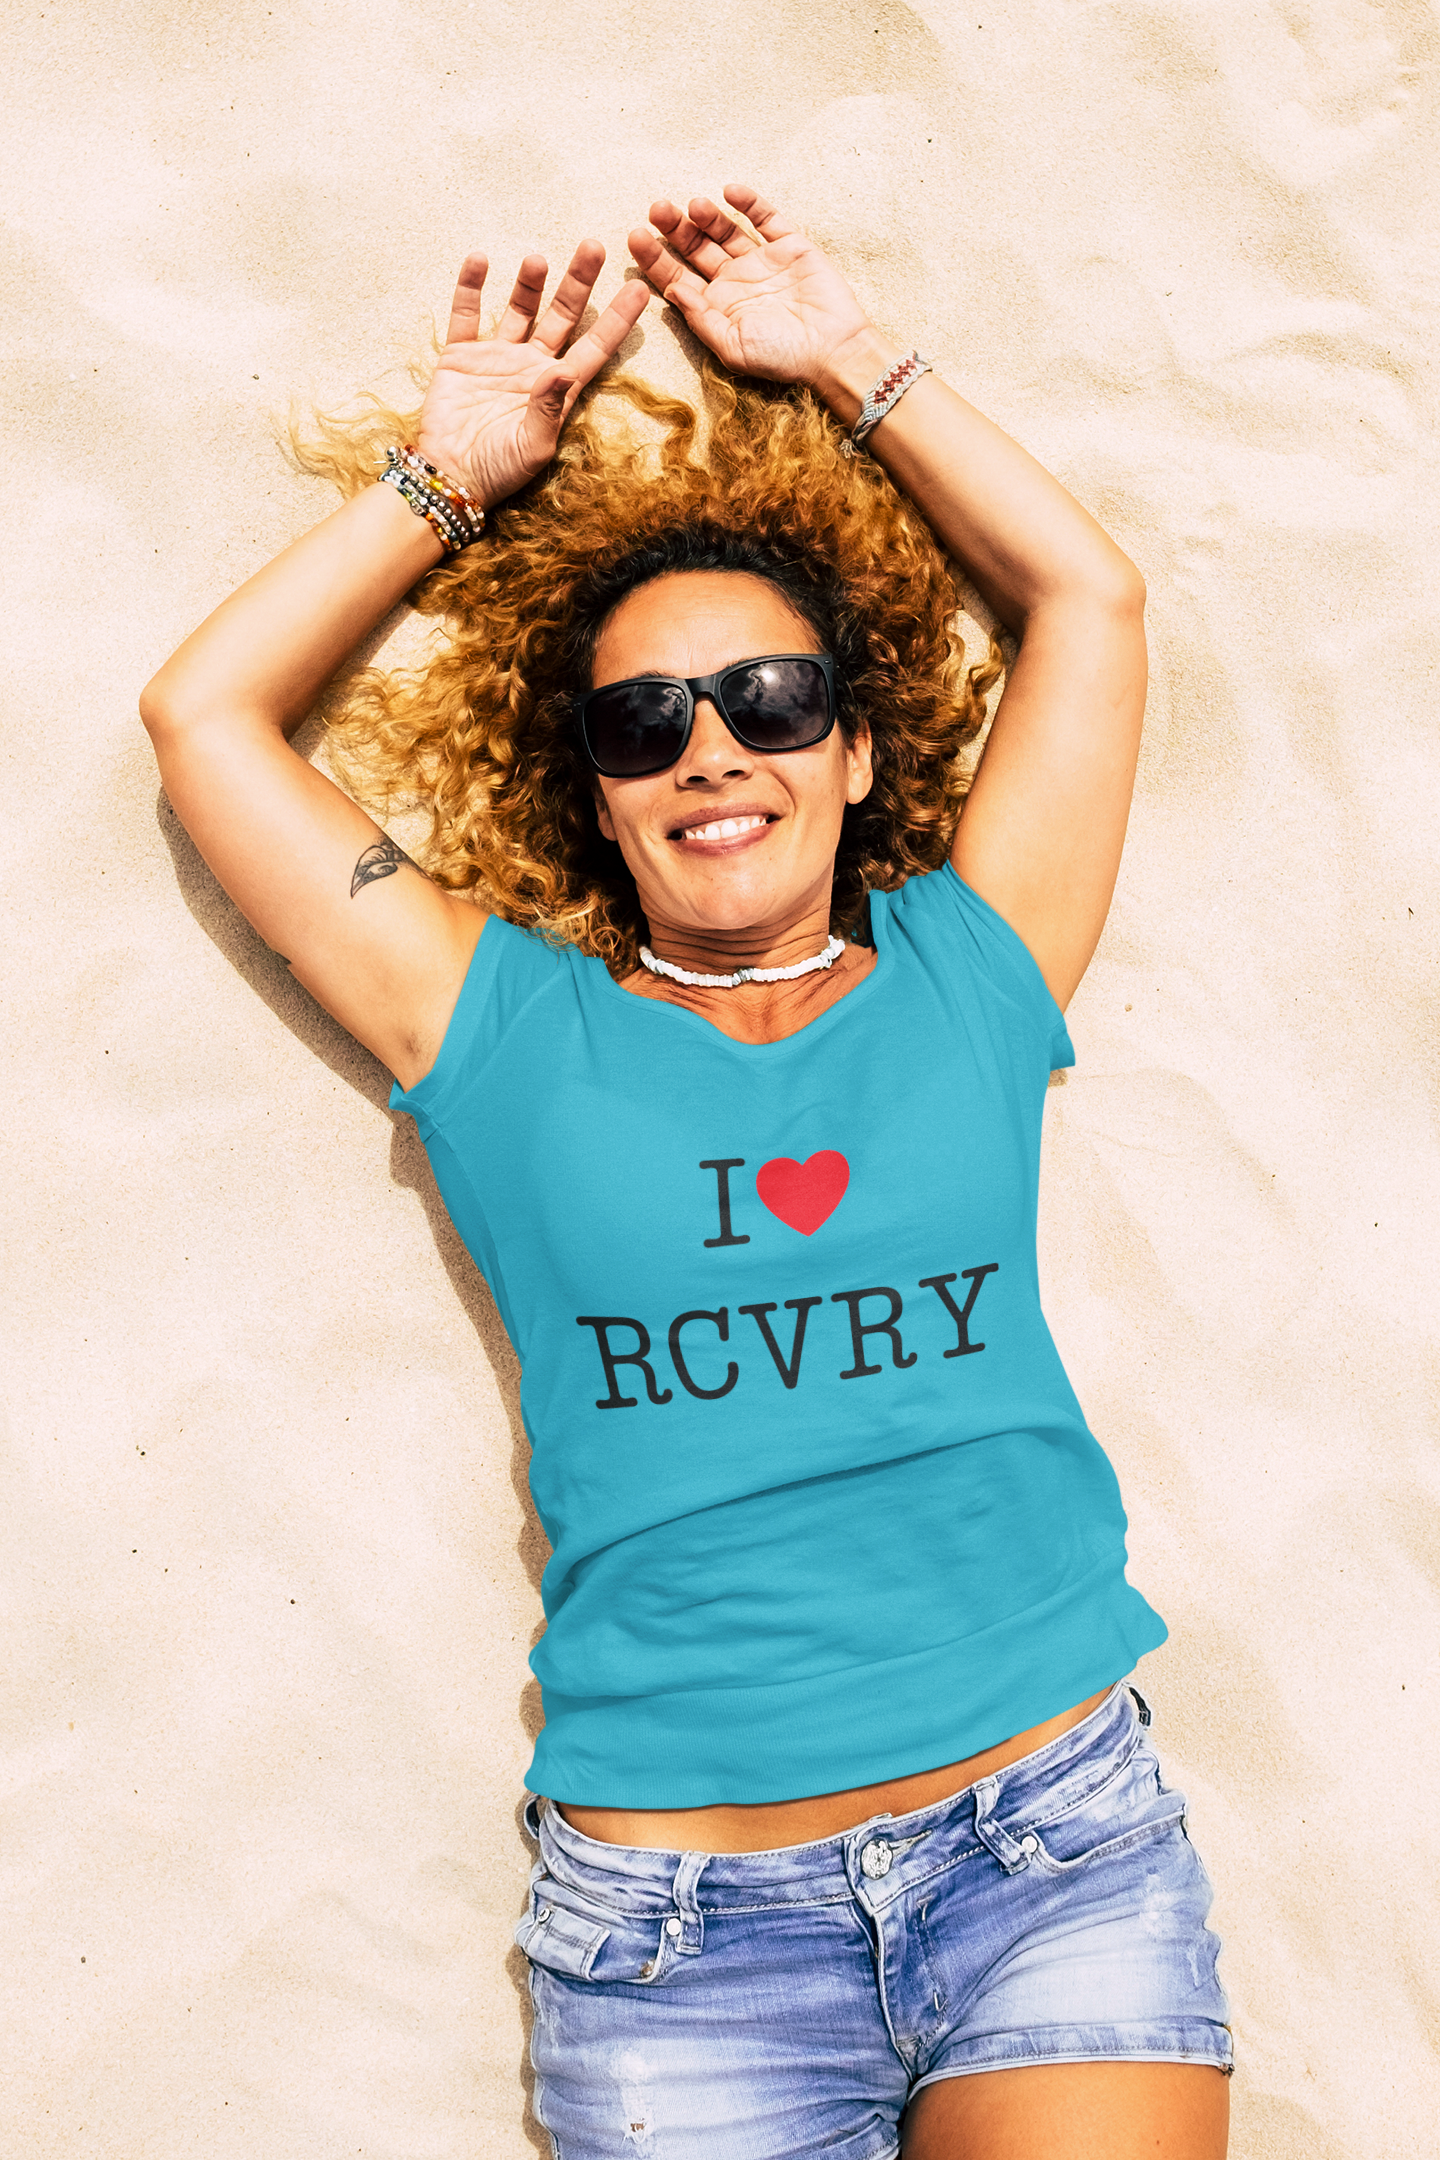 I Love Recovery Women's Tee - Broken Chains Apparel